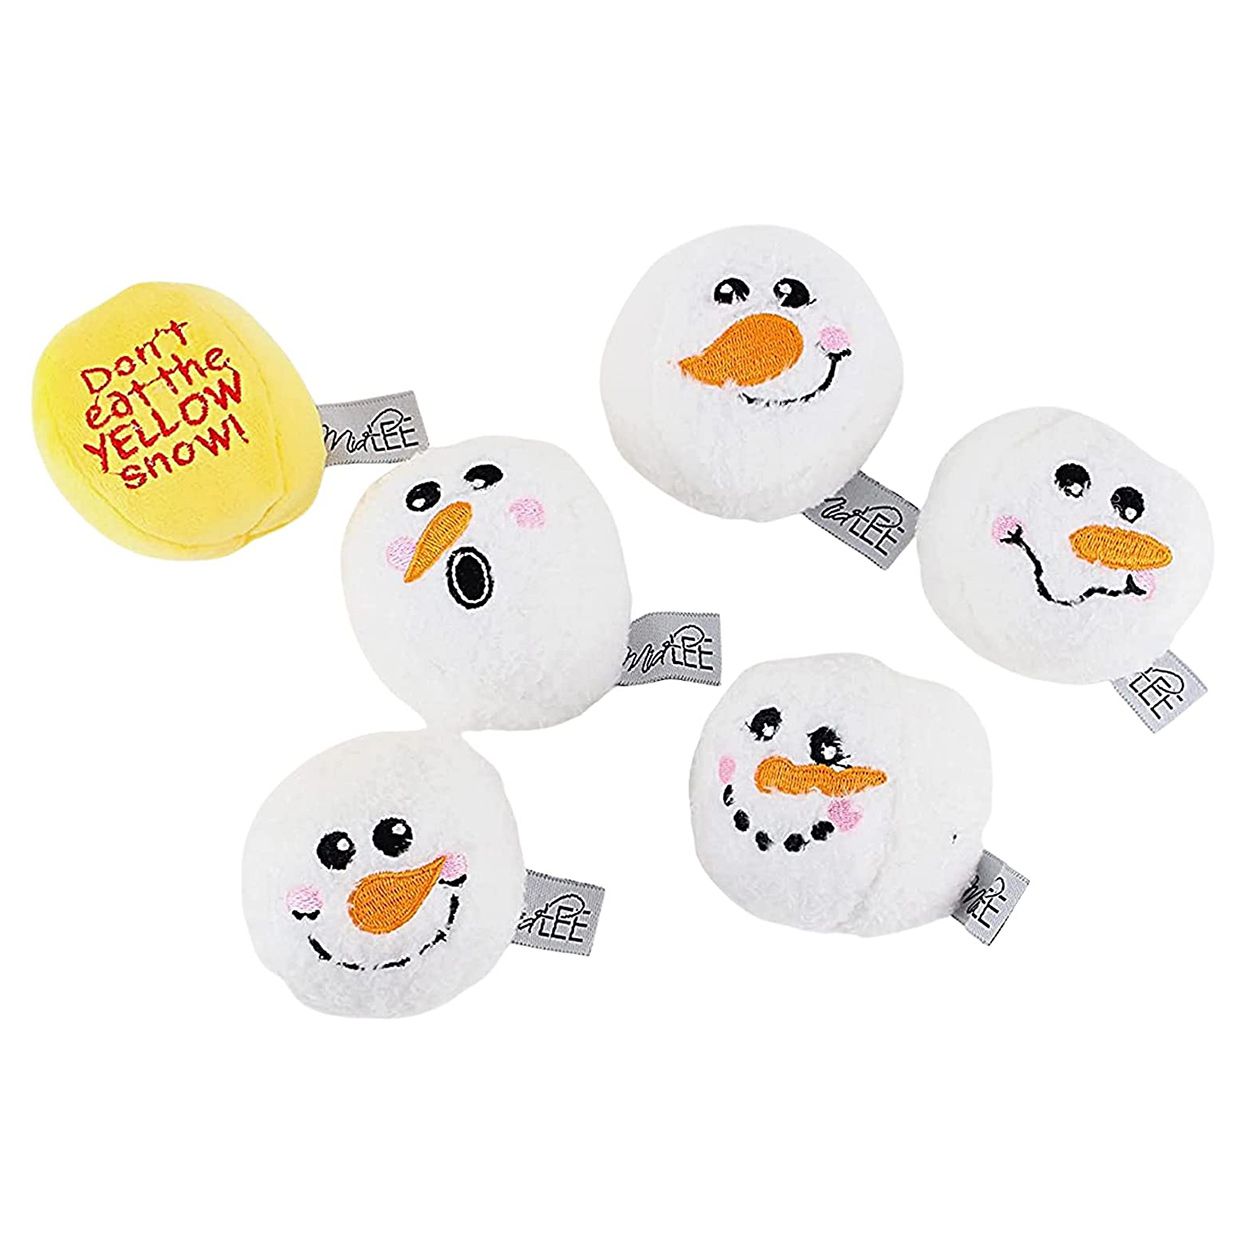 Product photo of a Snowball Fight Plush Dog Toy